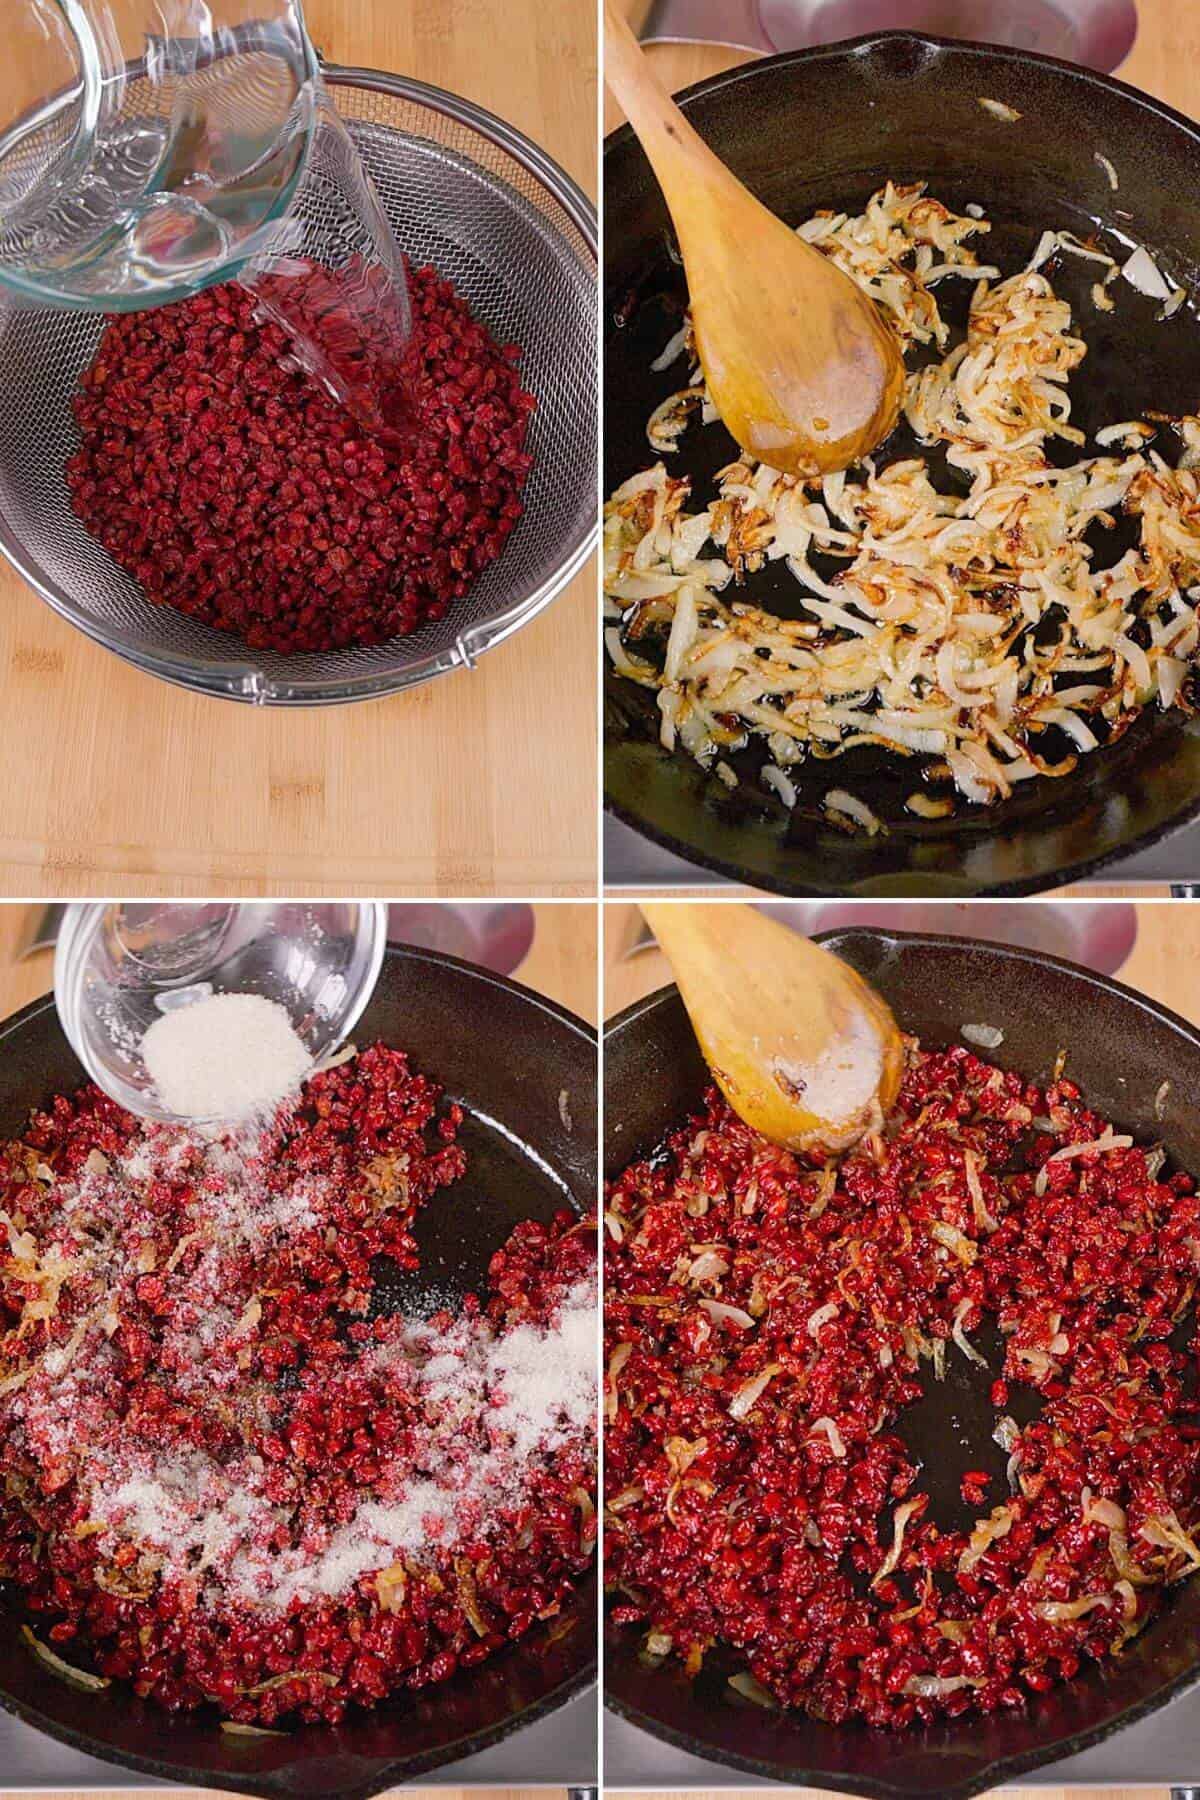 Dried barberries being prepared for the rice dish.